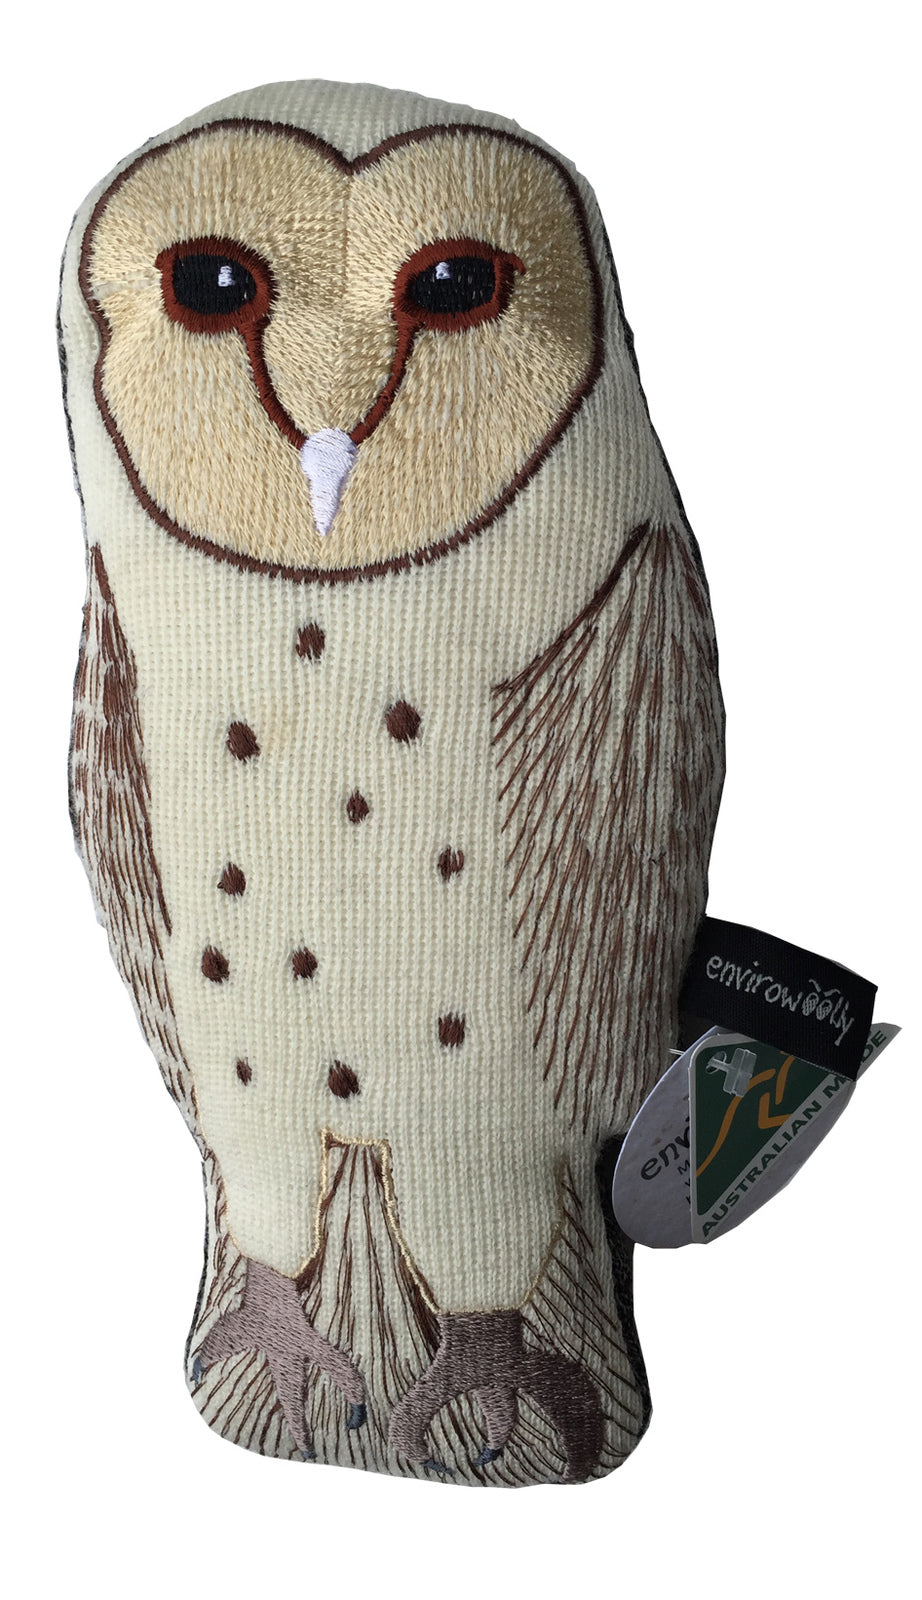 A knitted owl toy.